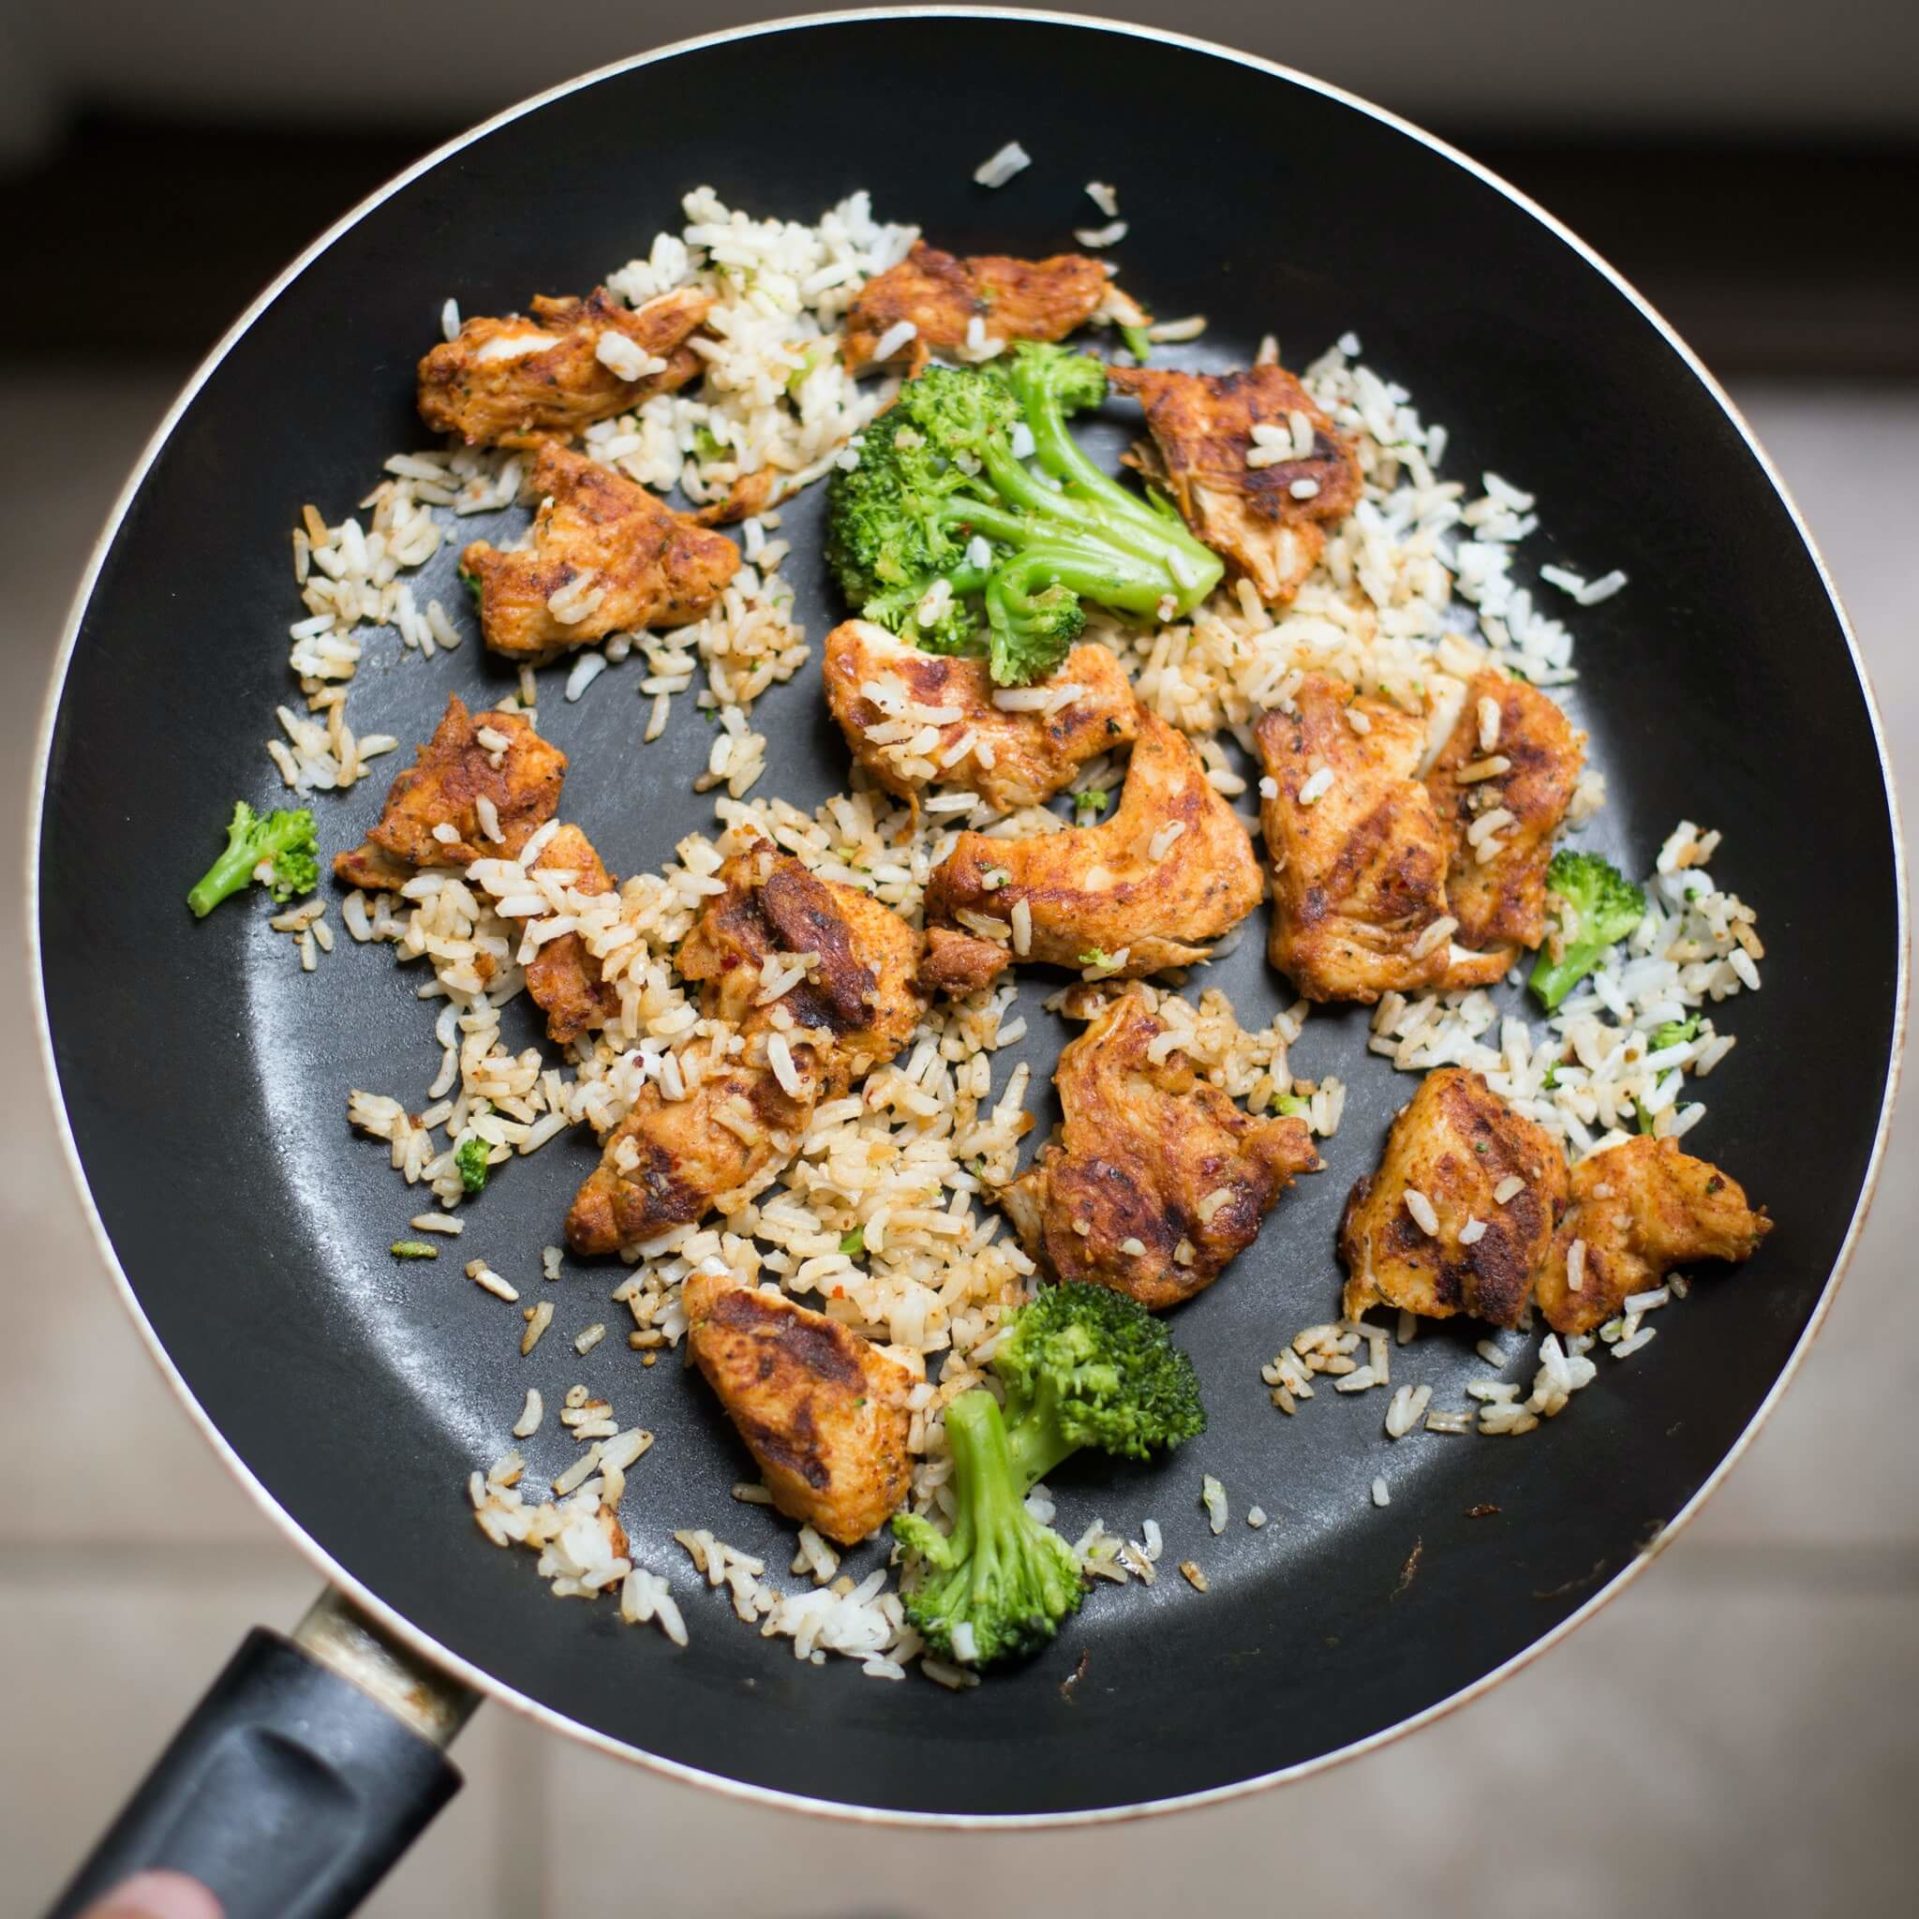 Chicken, rice and broccoli in a pan.